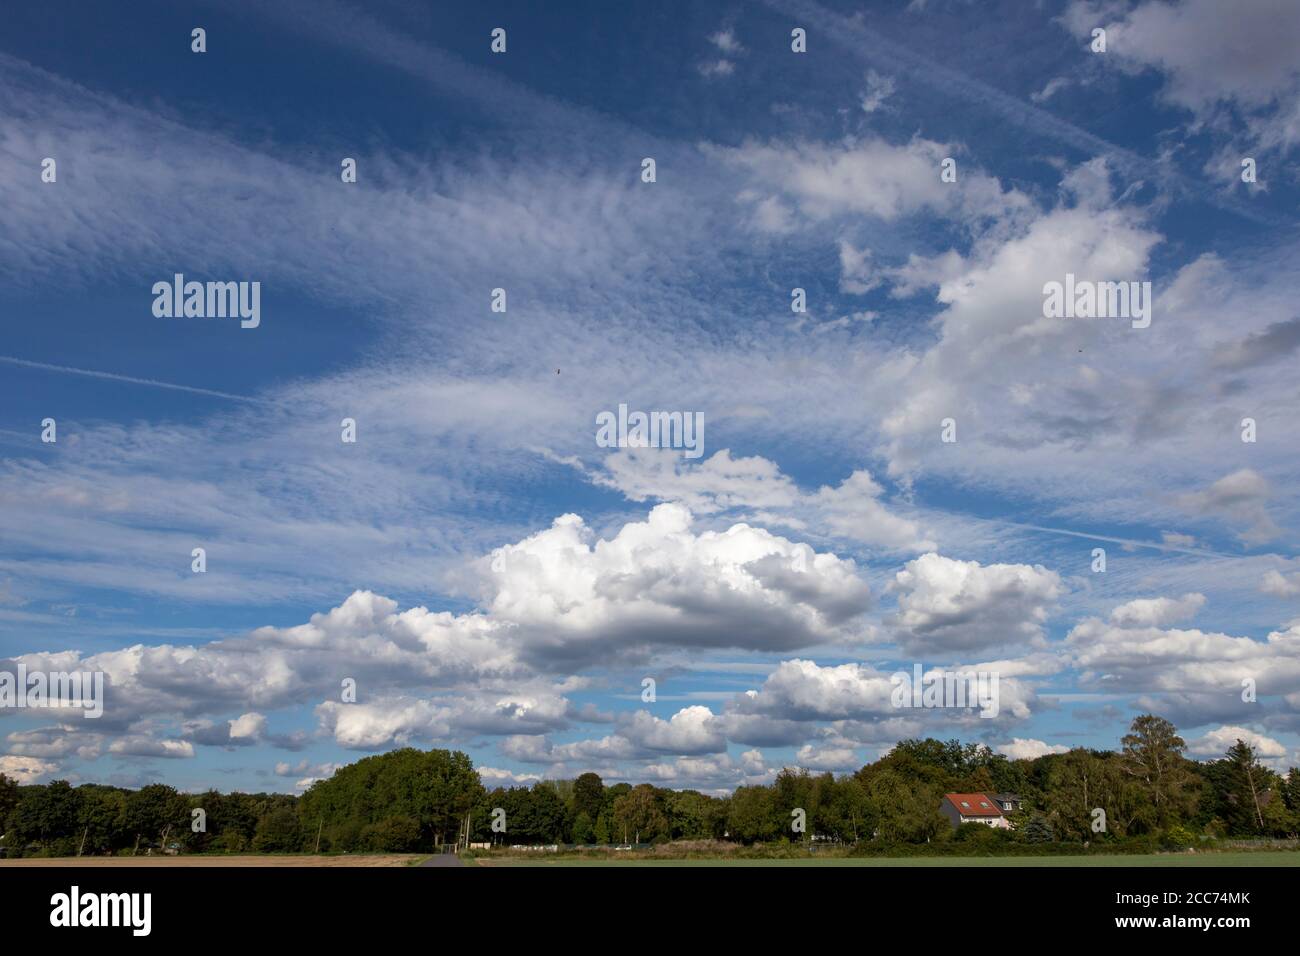 blue sky with clouds and condensation trails above a small village and trees, outdoors Stock Photo